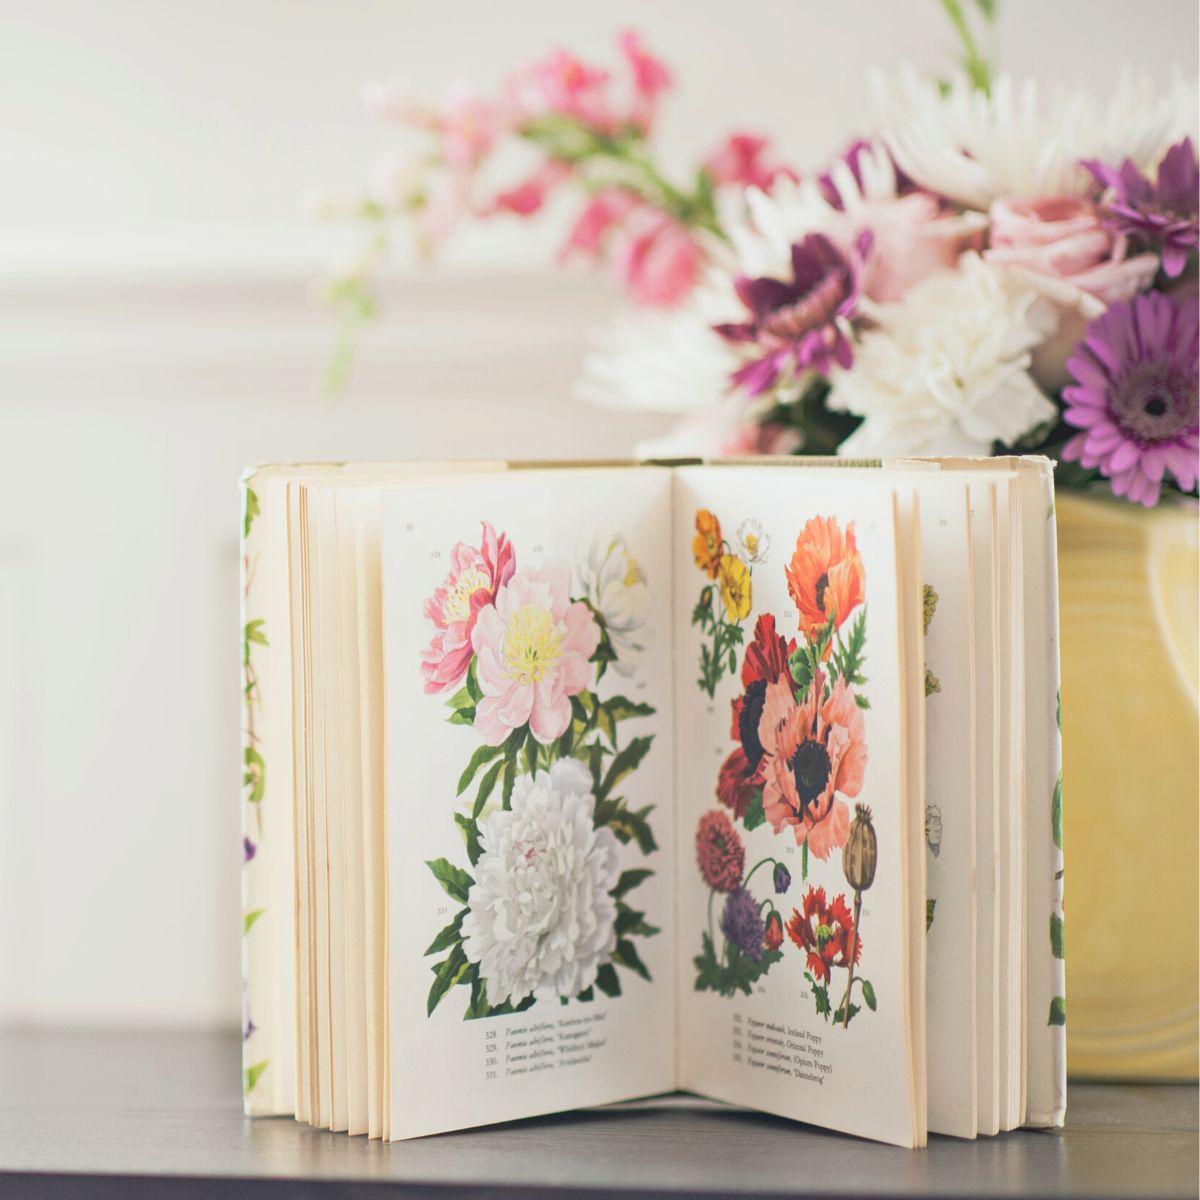 Best floristry books to read in 2023 featured